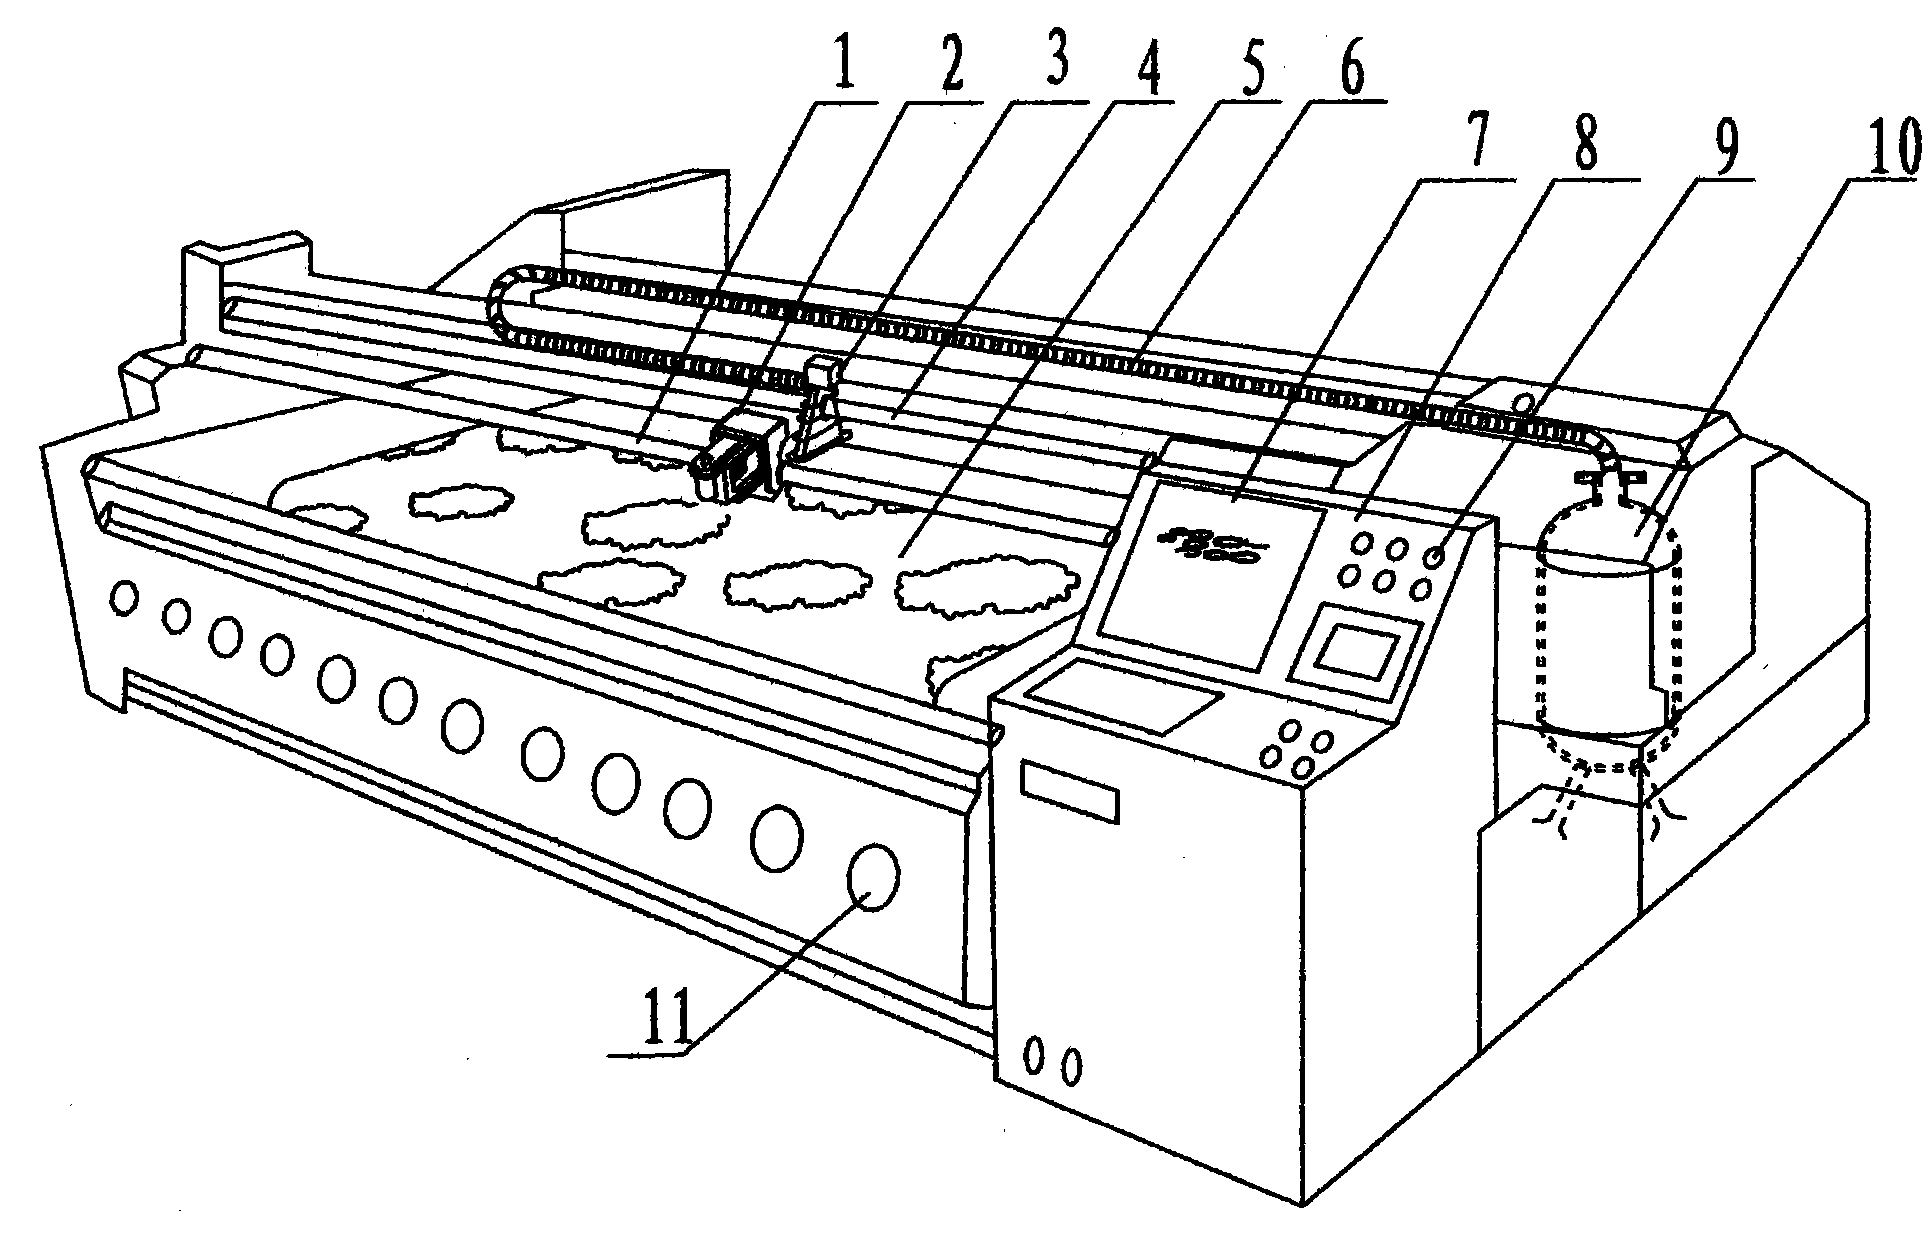 Fabric printing and dyeing device with electron accelerator mechanism